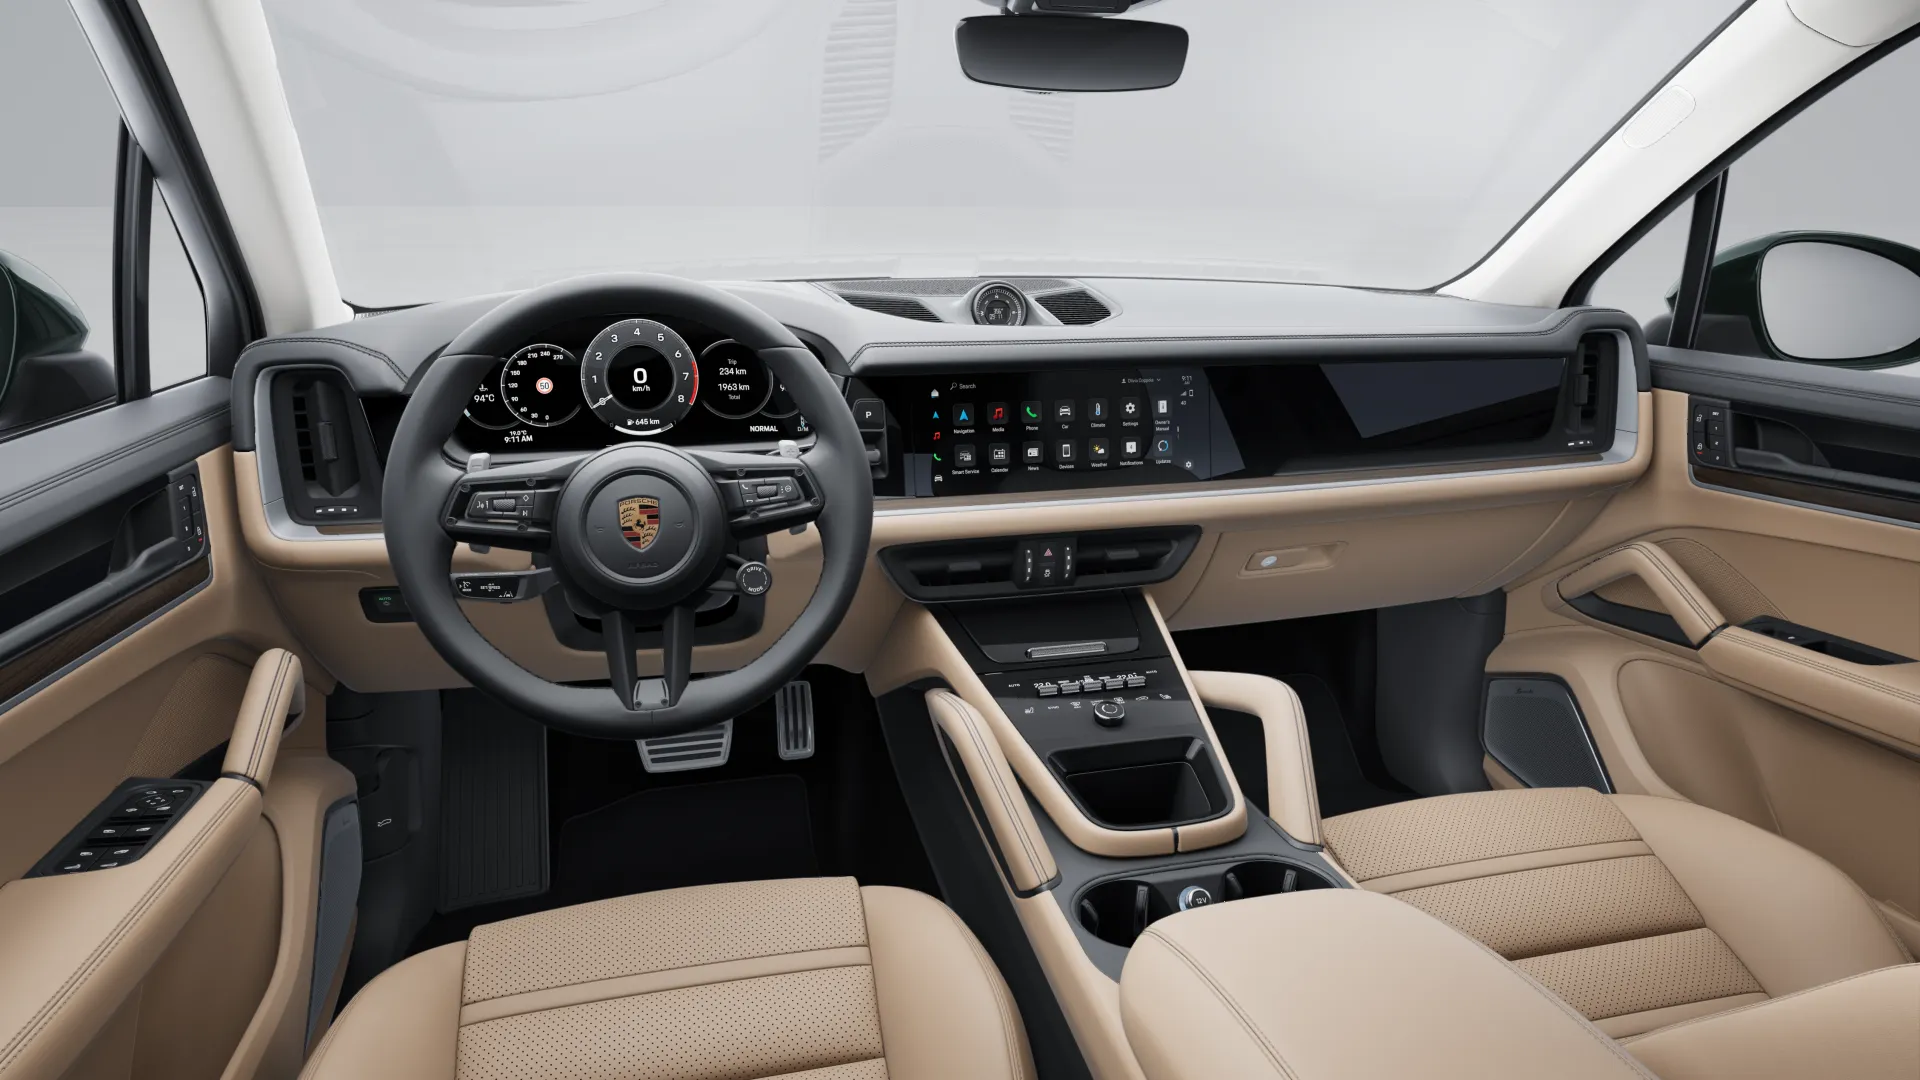 Interior view of Cayenne S